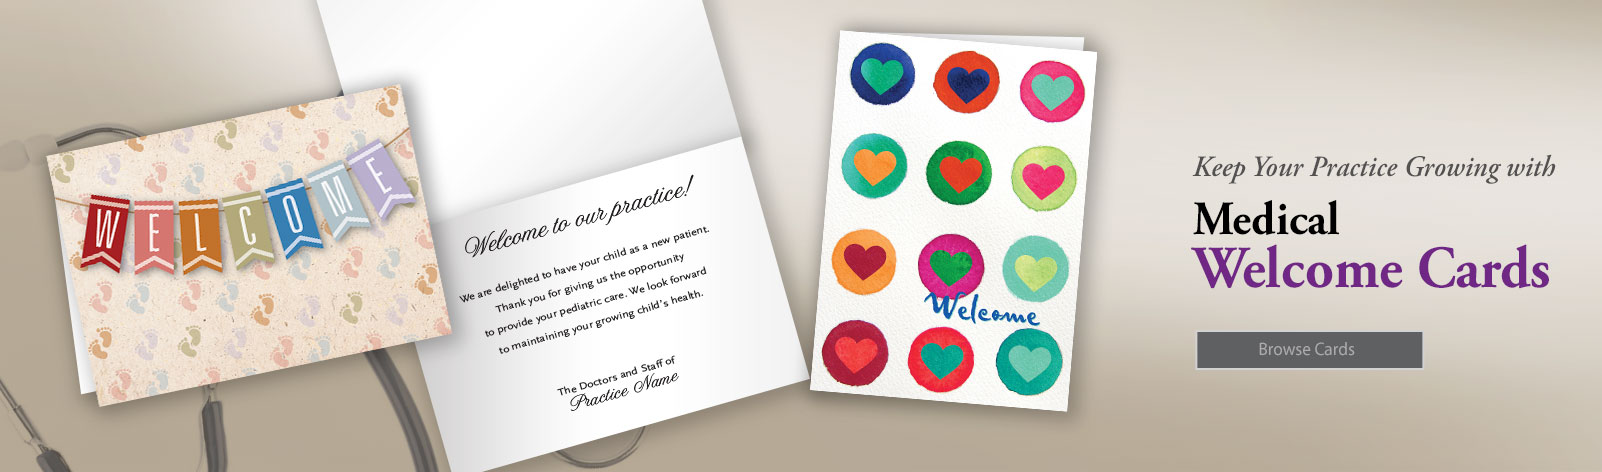 Medical Welcome Cards